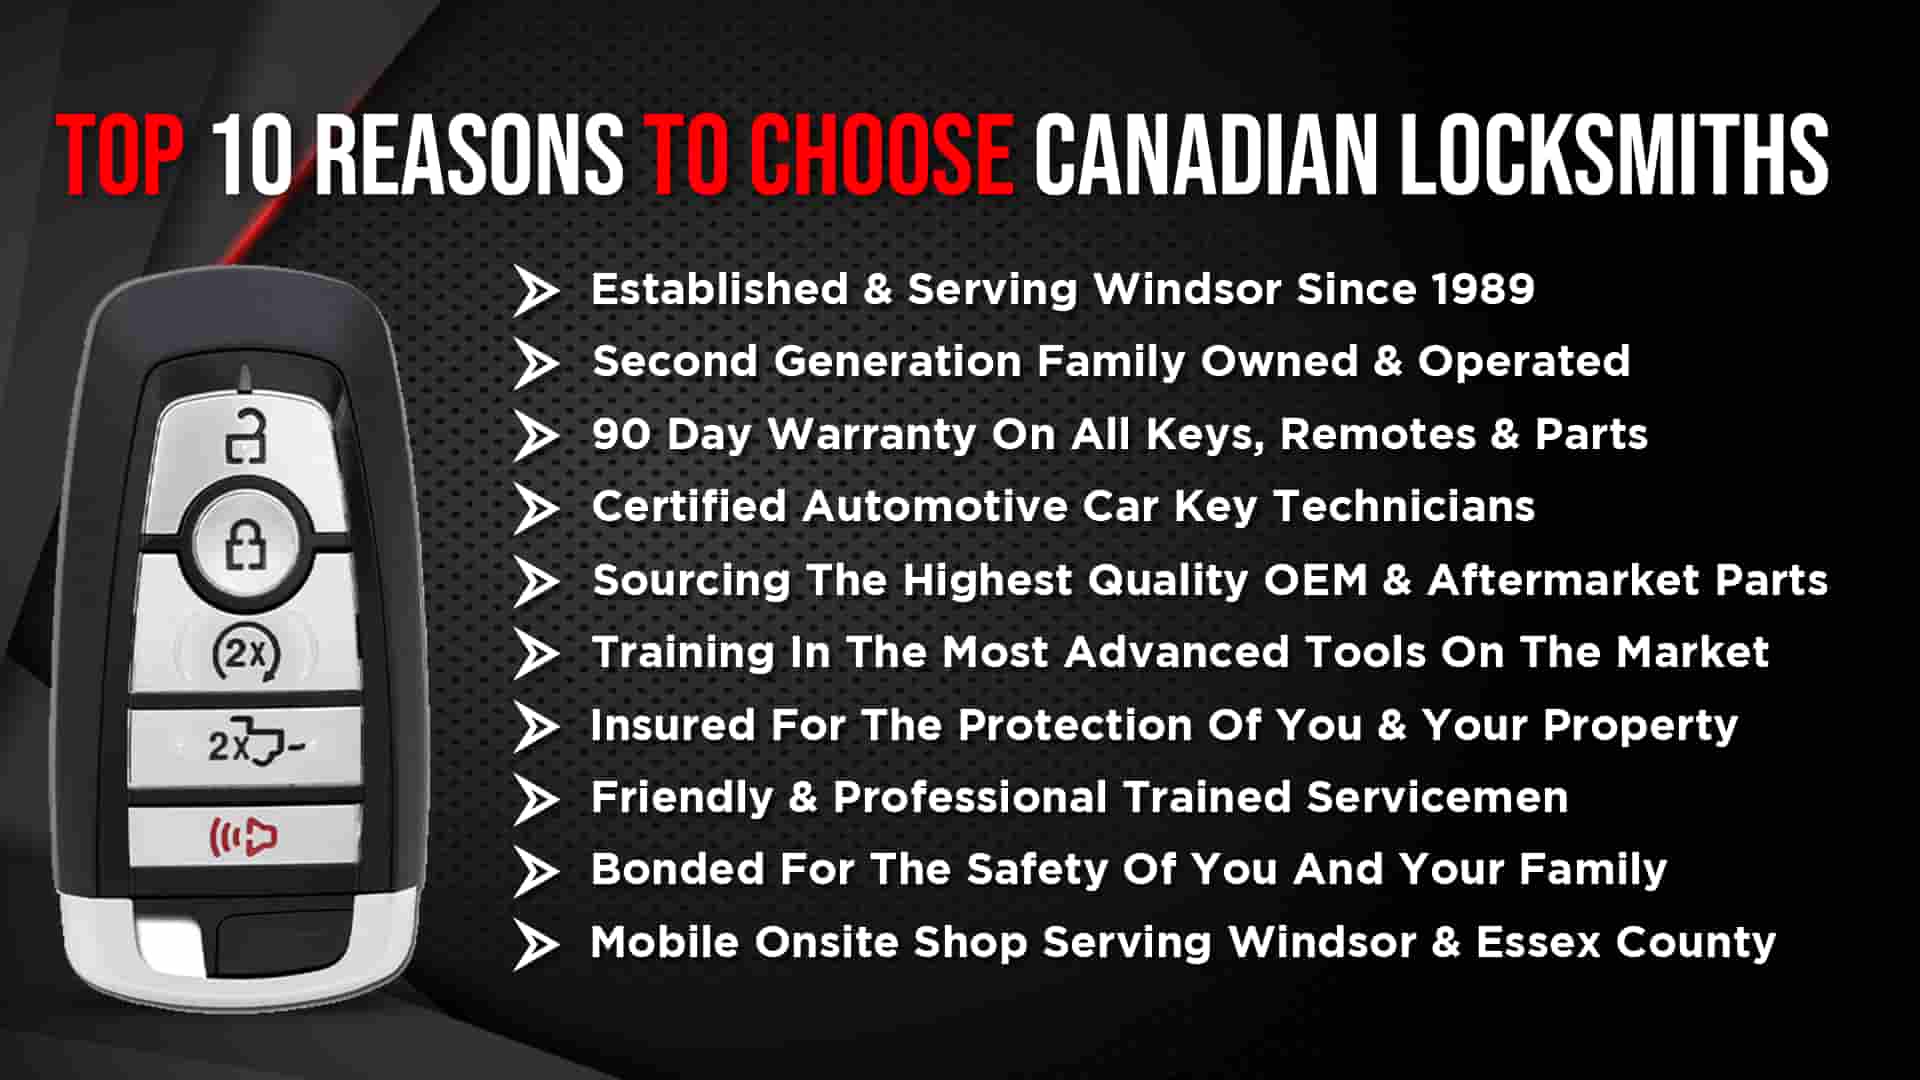 Top 10 list of reasons to use Canadian Locksmiths in Windsor Ontario for car key replacement